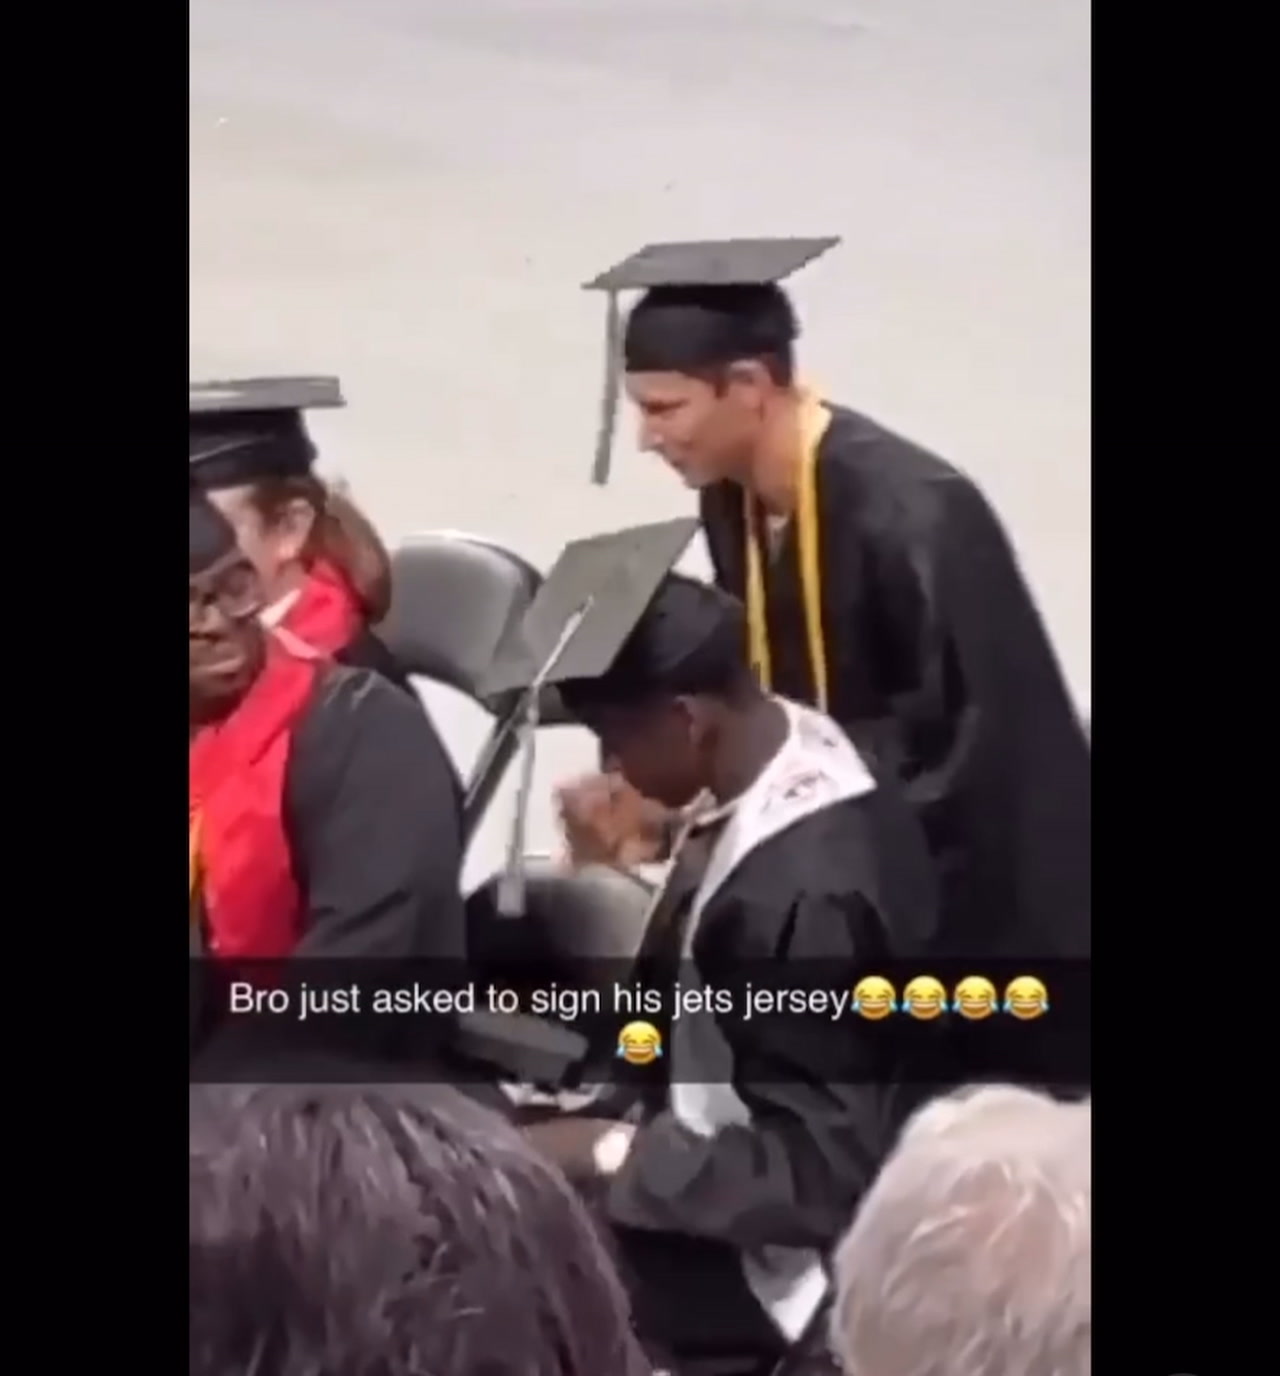 Sauce Gardner finishes what he started with Cincinnati graduation